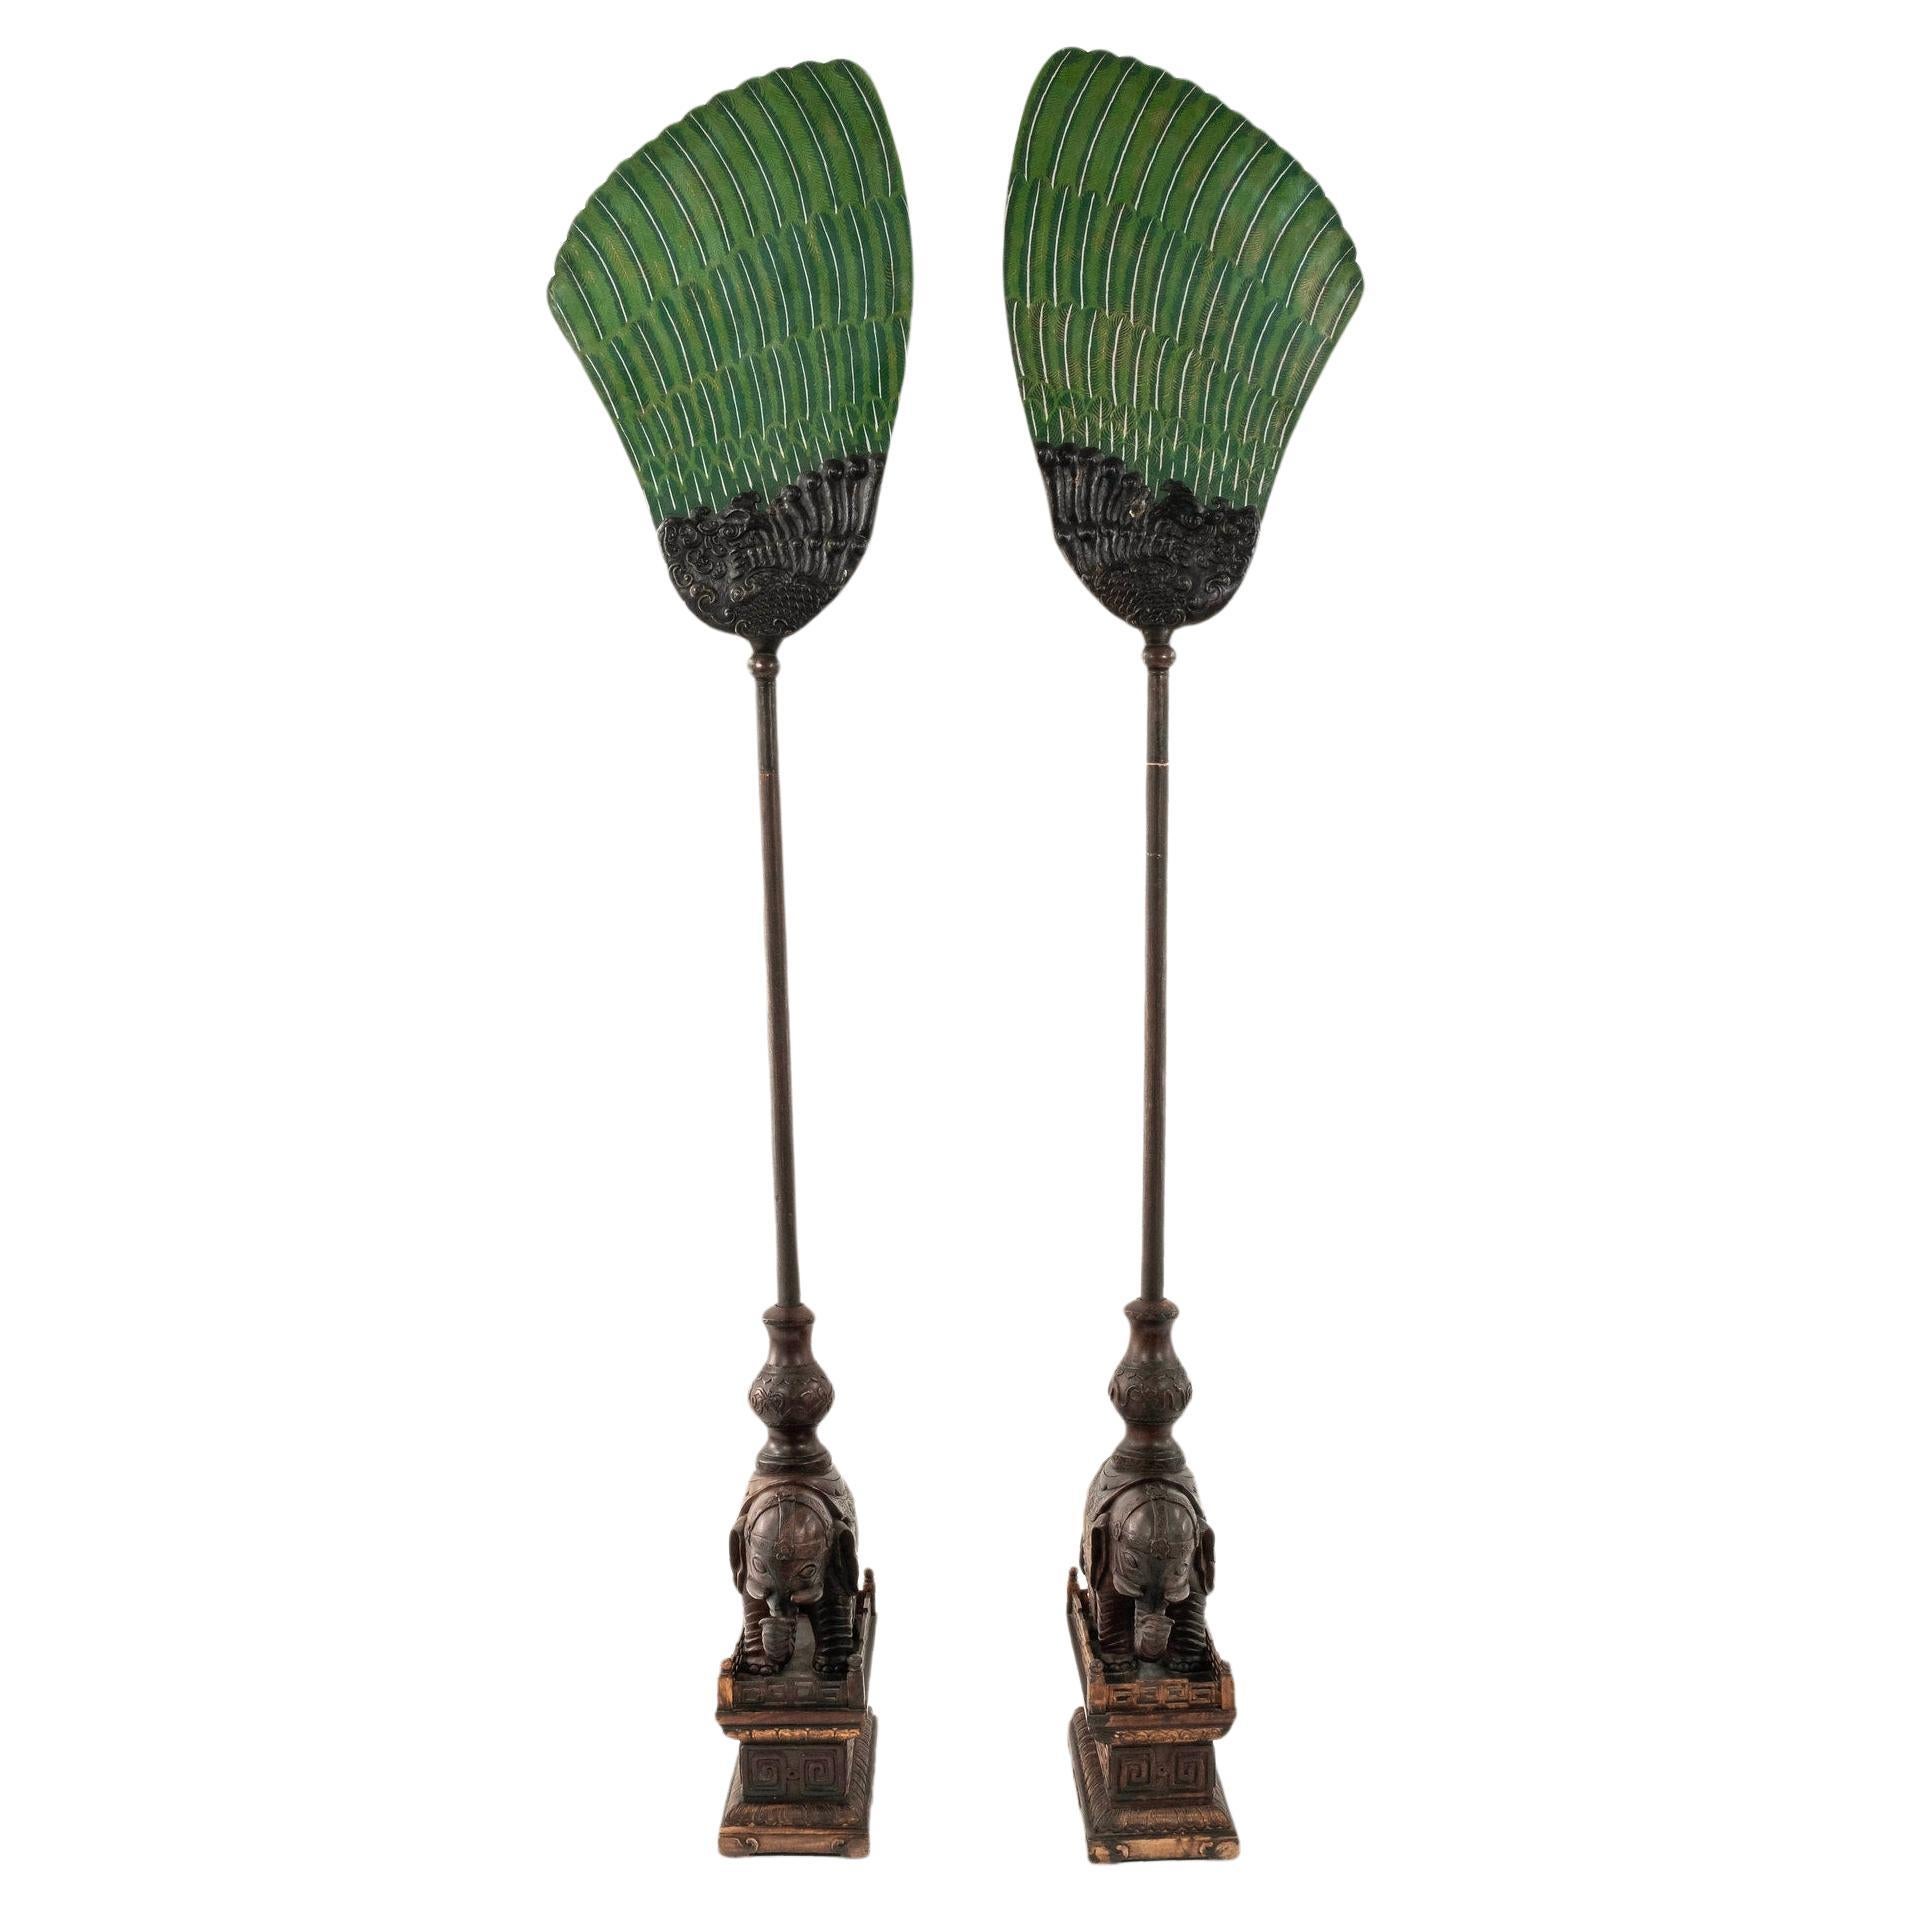 A rare  pair of 19th Century or earlier, towering Chinese bronze cloisonné Royal palm leaf fans atop hand carved titan wood poles and elephants  on gallery plinths.